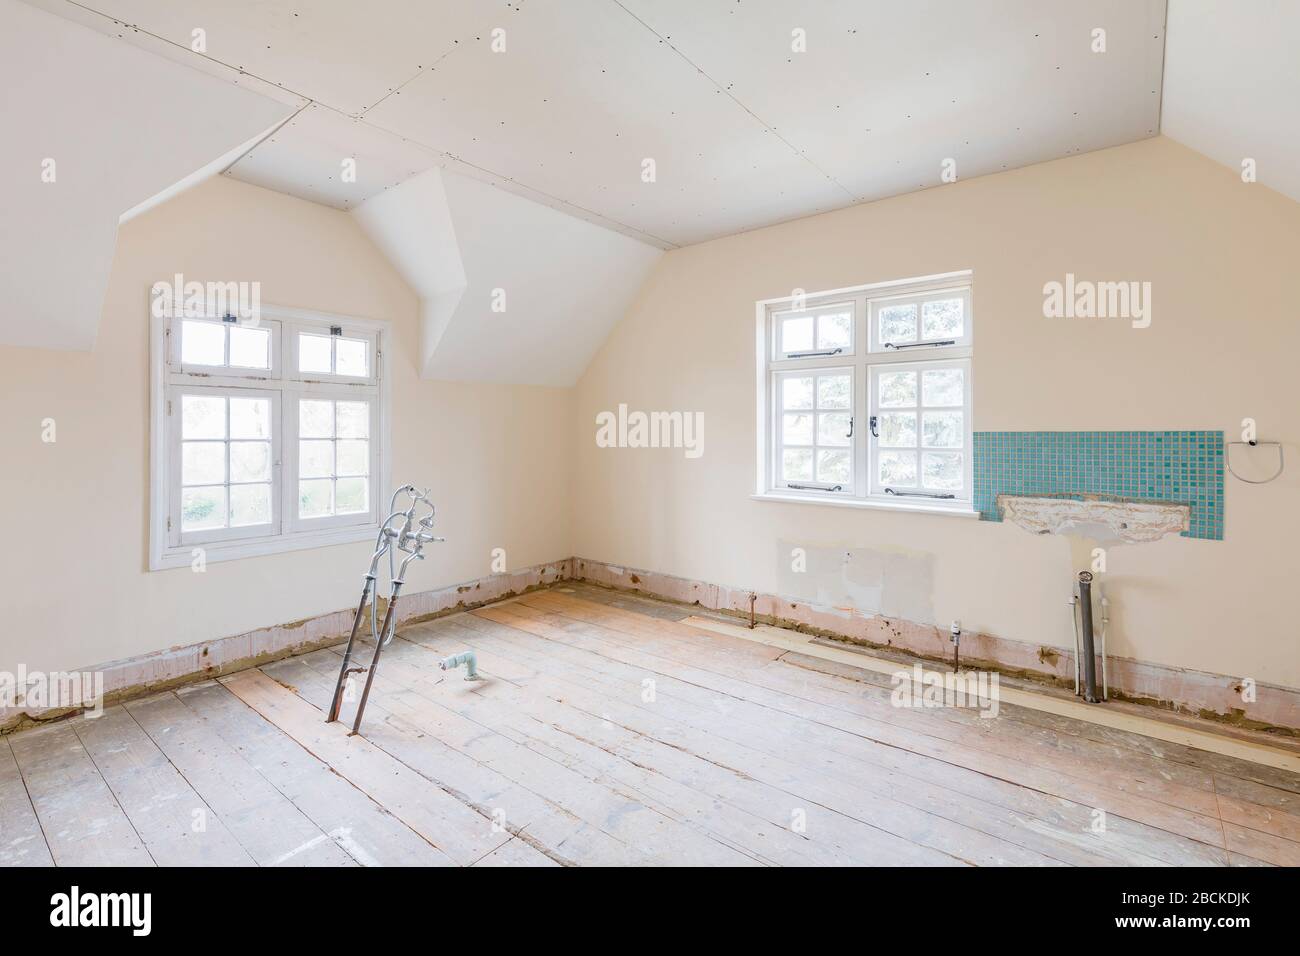 Room interior renovation before remodeling and installation of a bathroom, UK Stock Photo